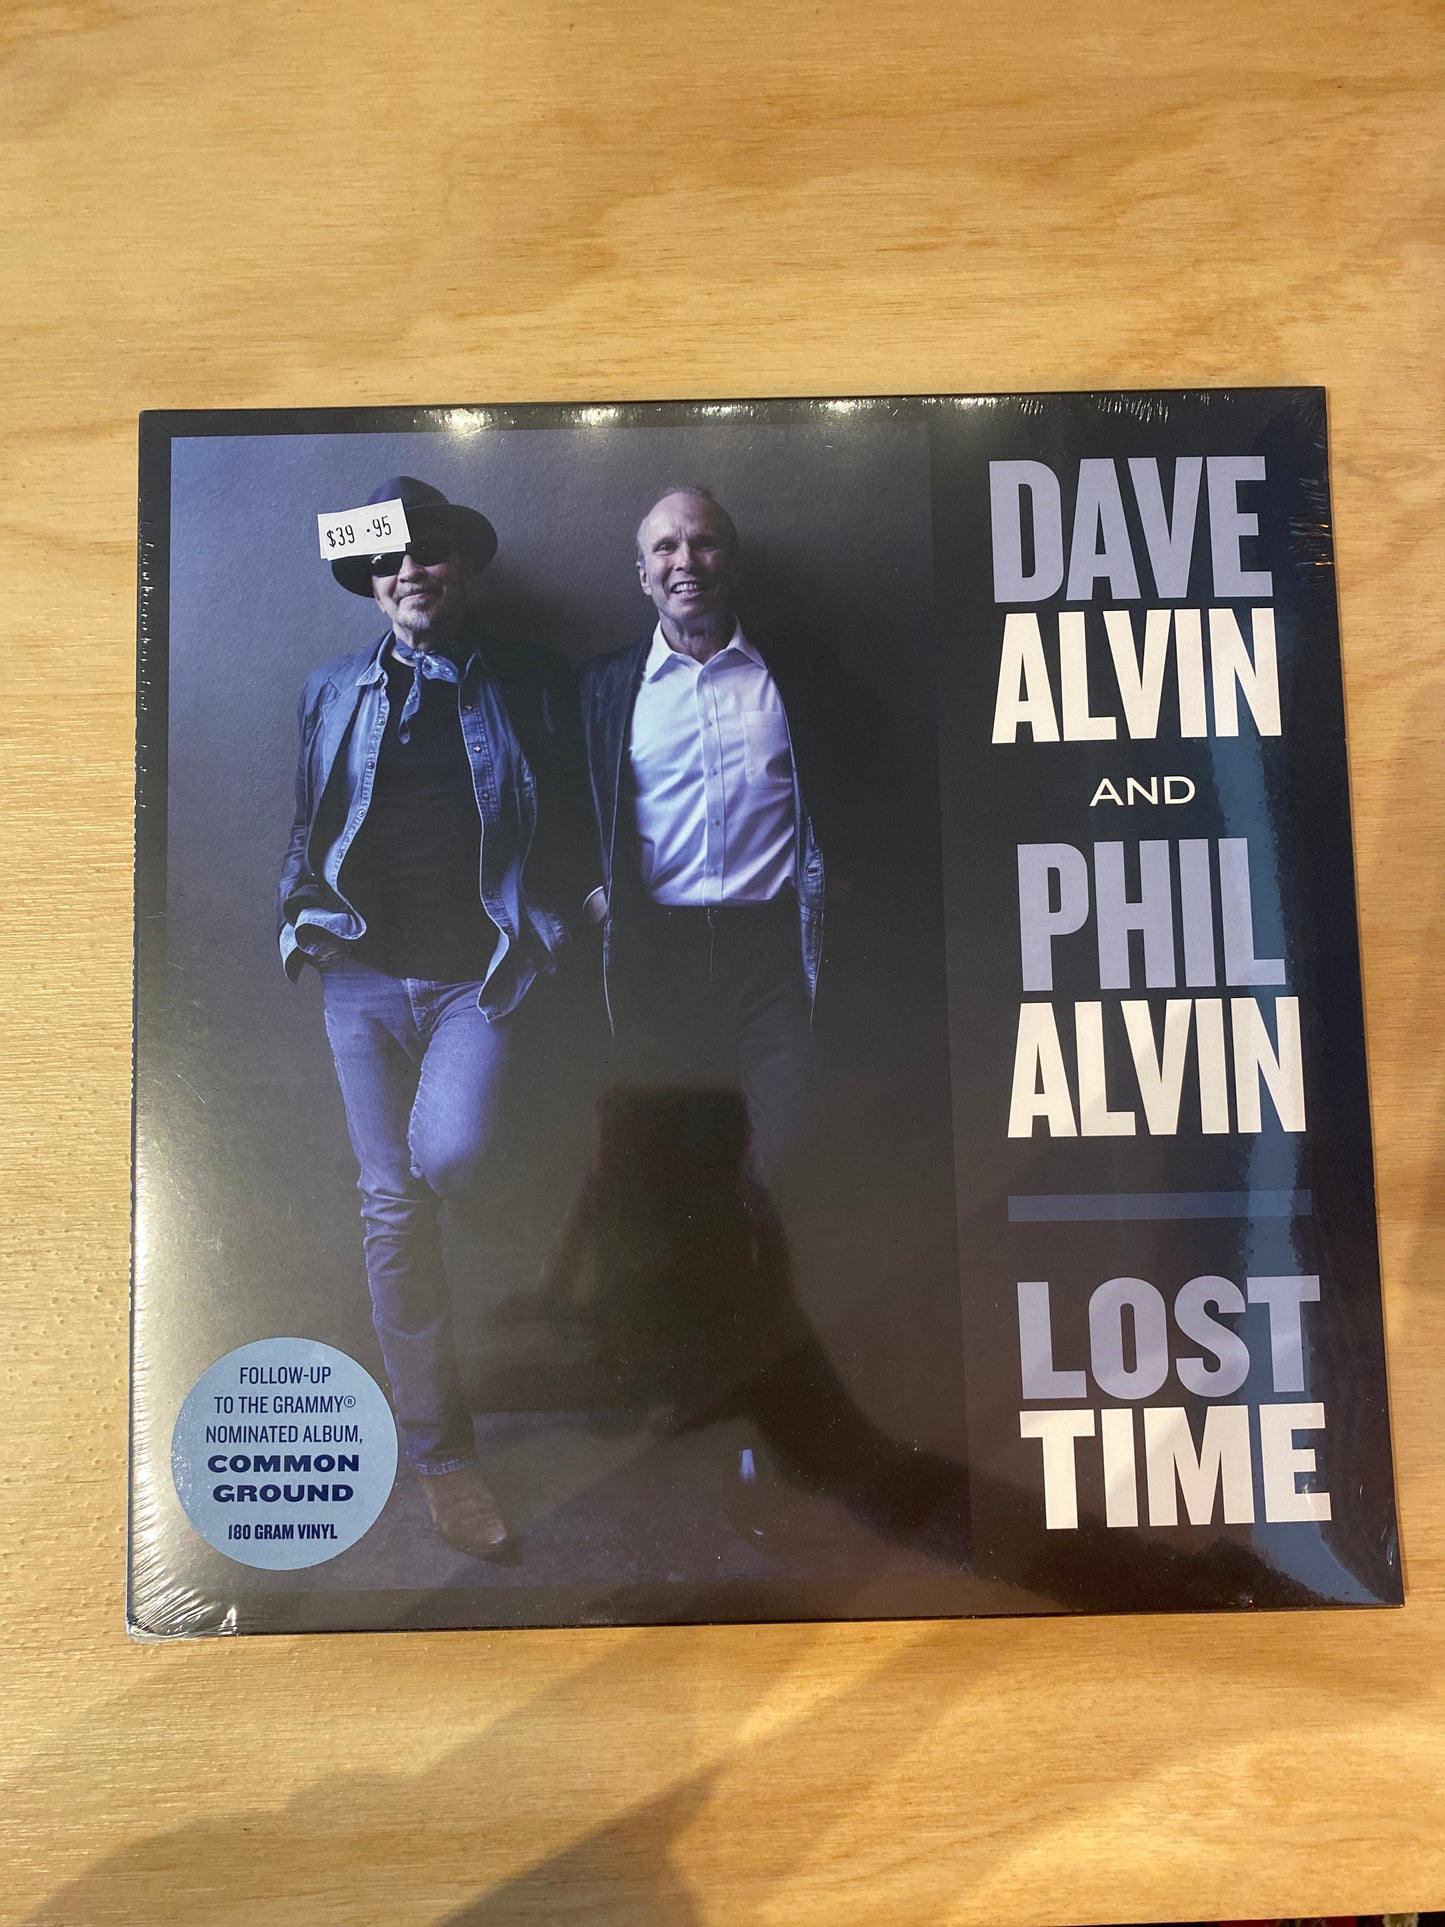 Dave and Phil Alvin - Lost Time - Vinyl LP